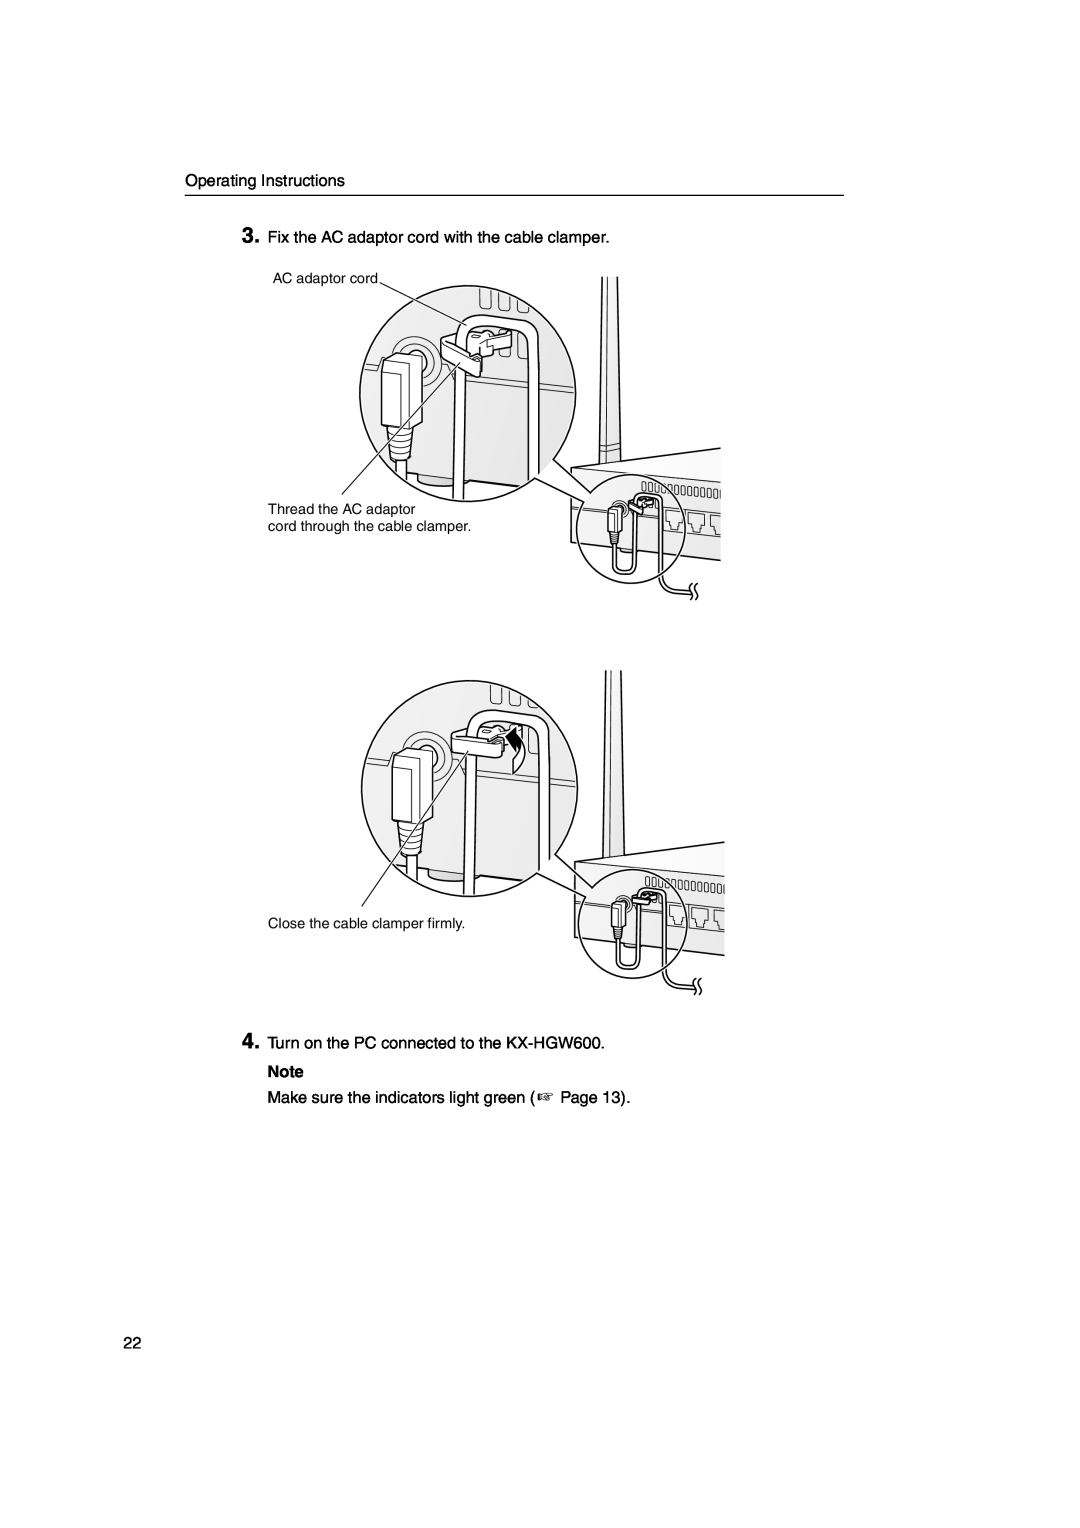 Panasonic KX-HGW600 Operating Instructions, Fix the AC adaptor cord with the cable clamper, Close the cable clamper firmly 